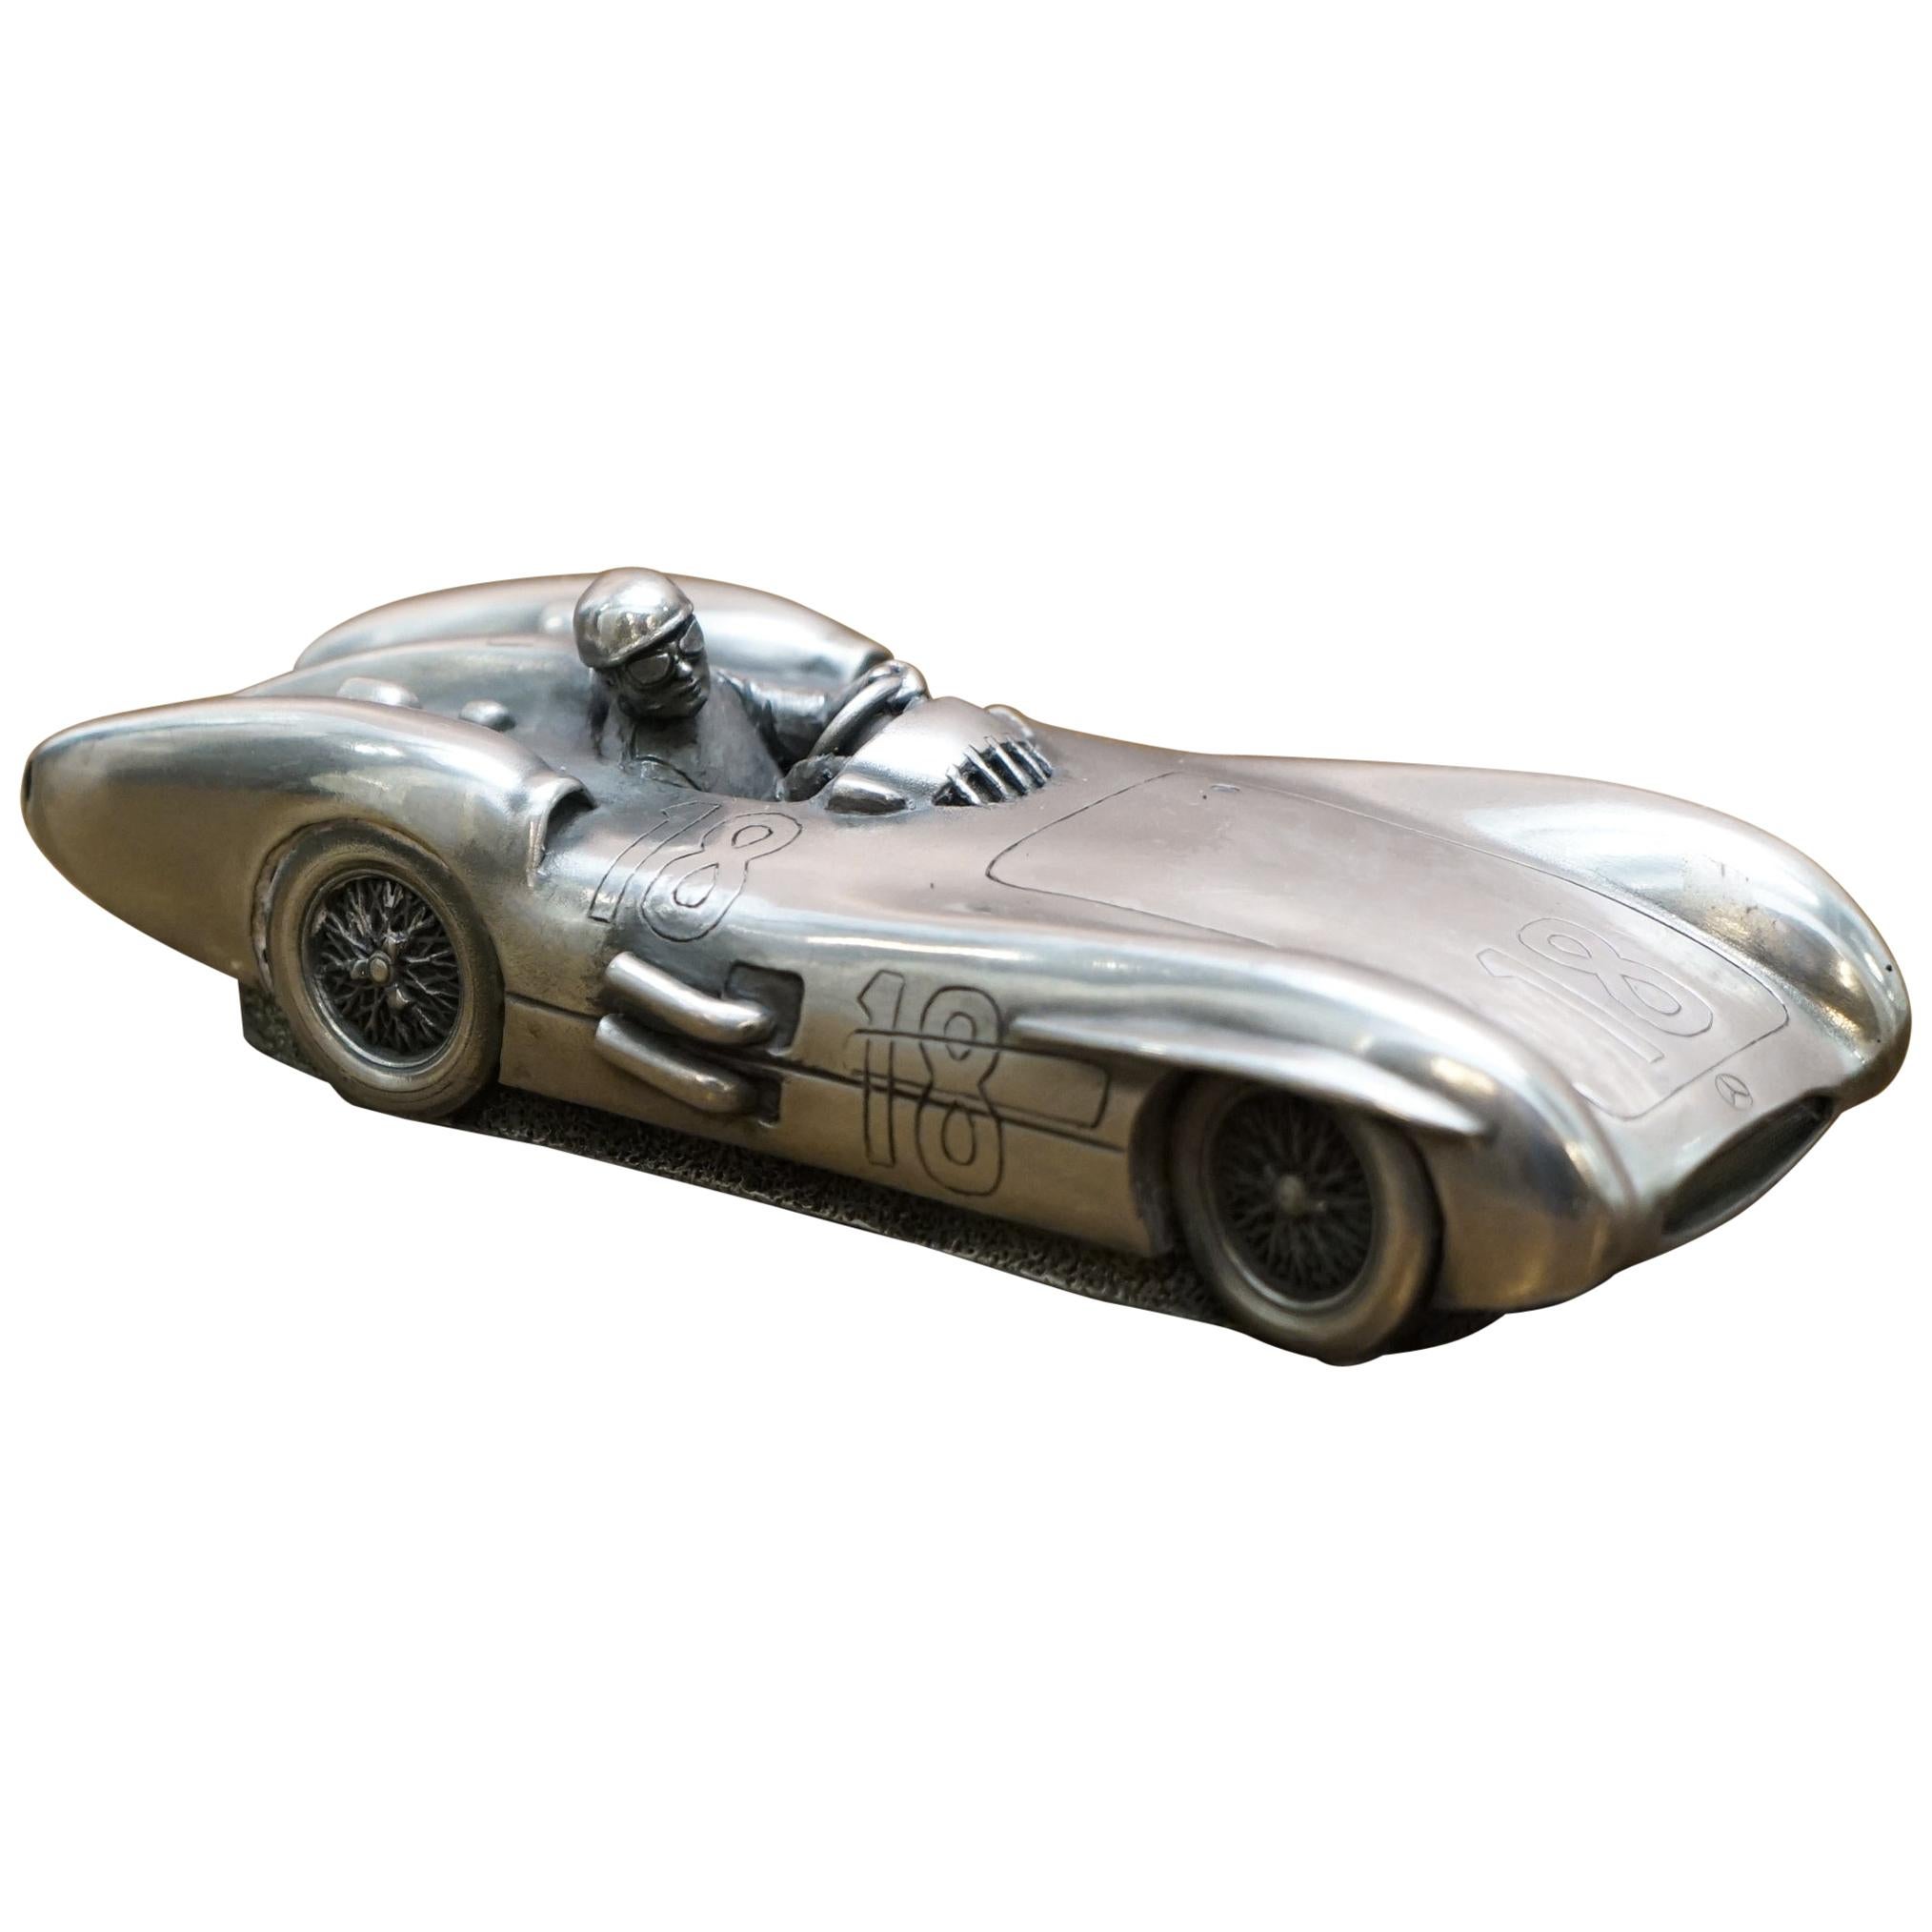 Compulsion Gallery Pewter Mercedes Benz W196 300SLR 1954-55 Racing Car Small